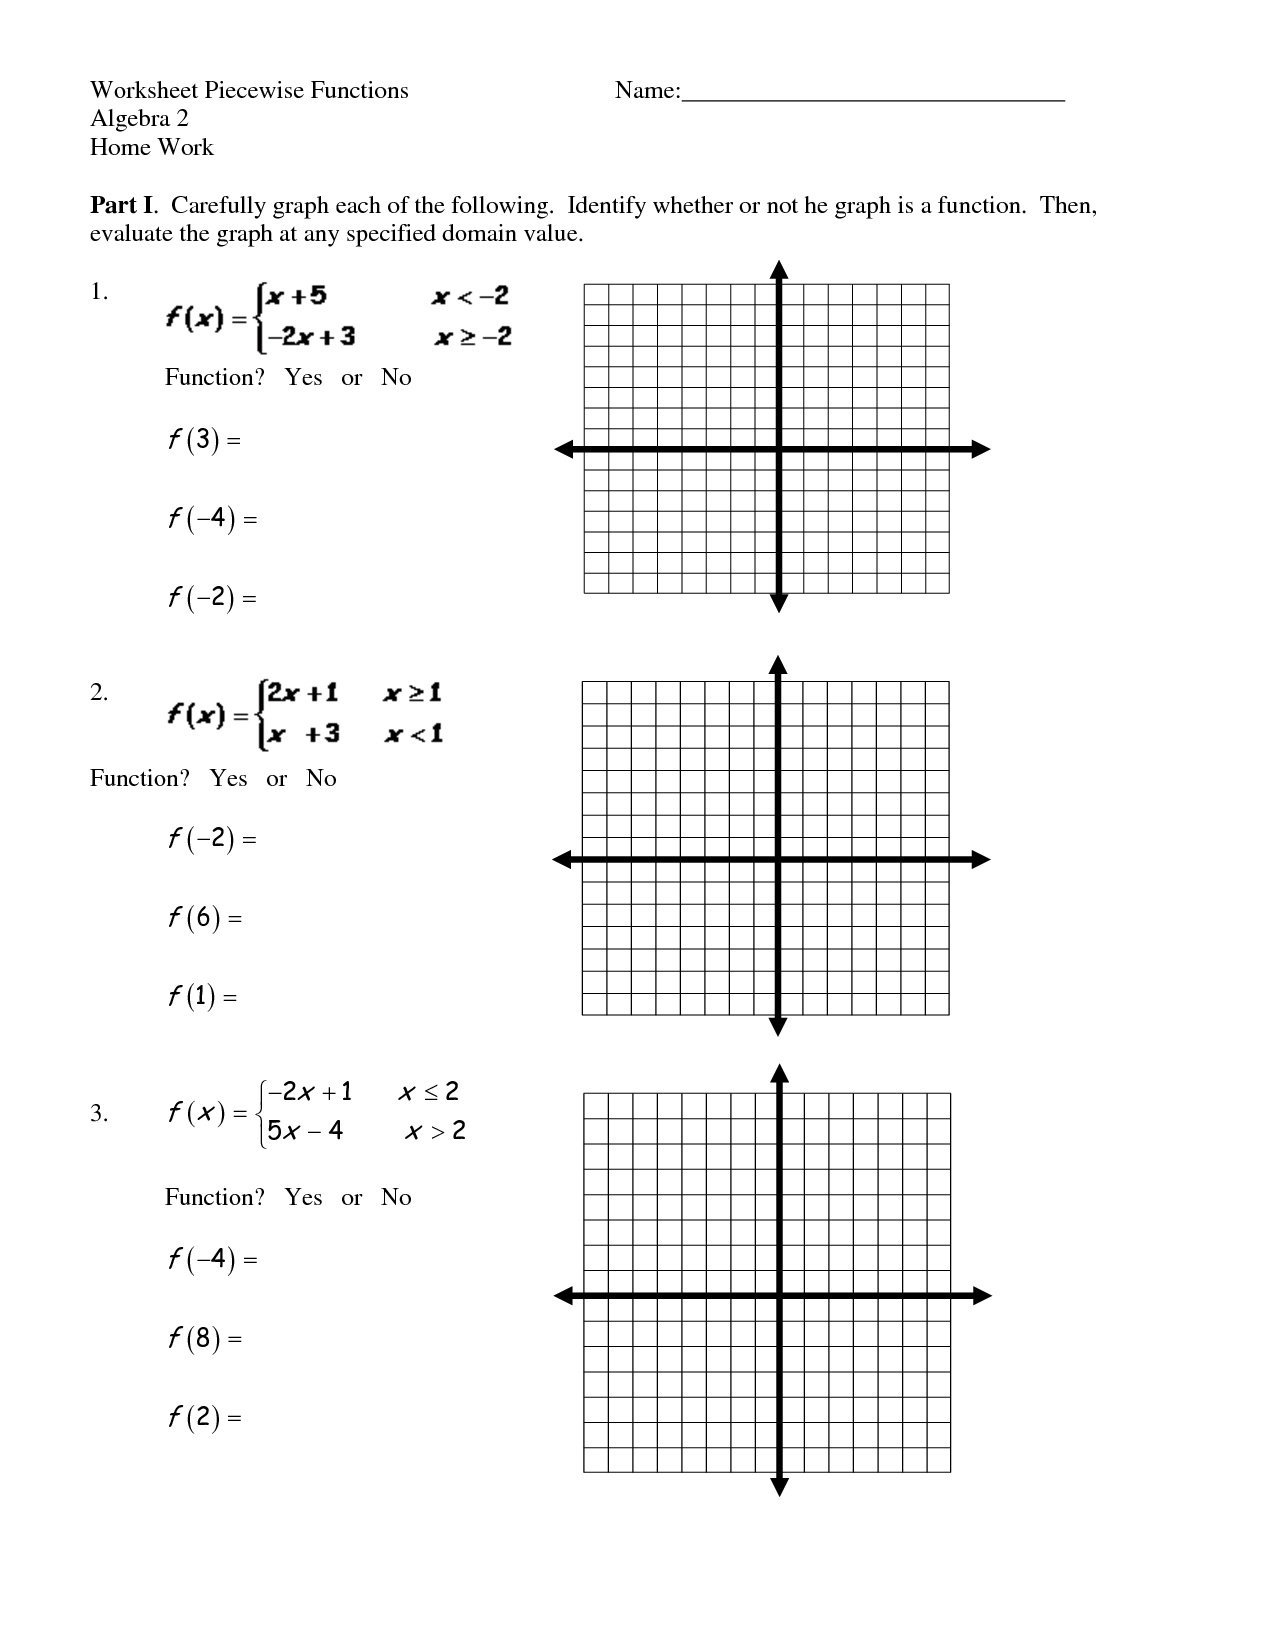 Worksheet Piecewise Functions Answers Cursive Worksheets Education Throughout Piecewise Functions Worksheet 1 Answers